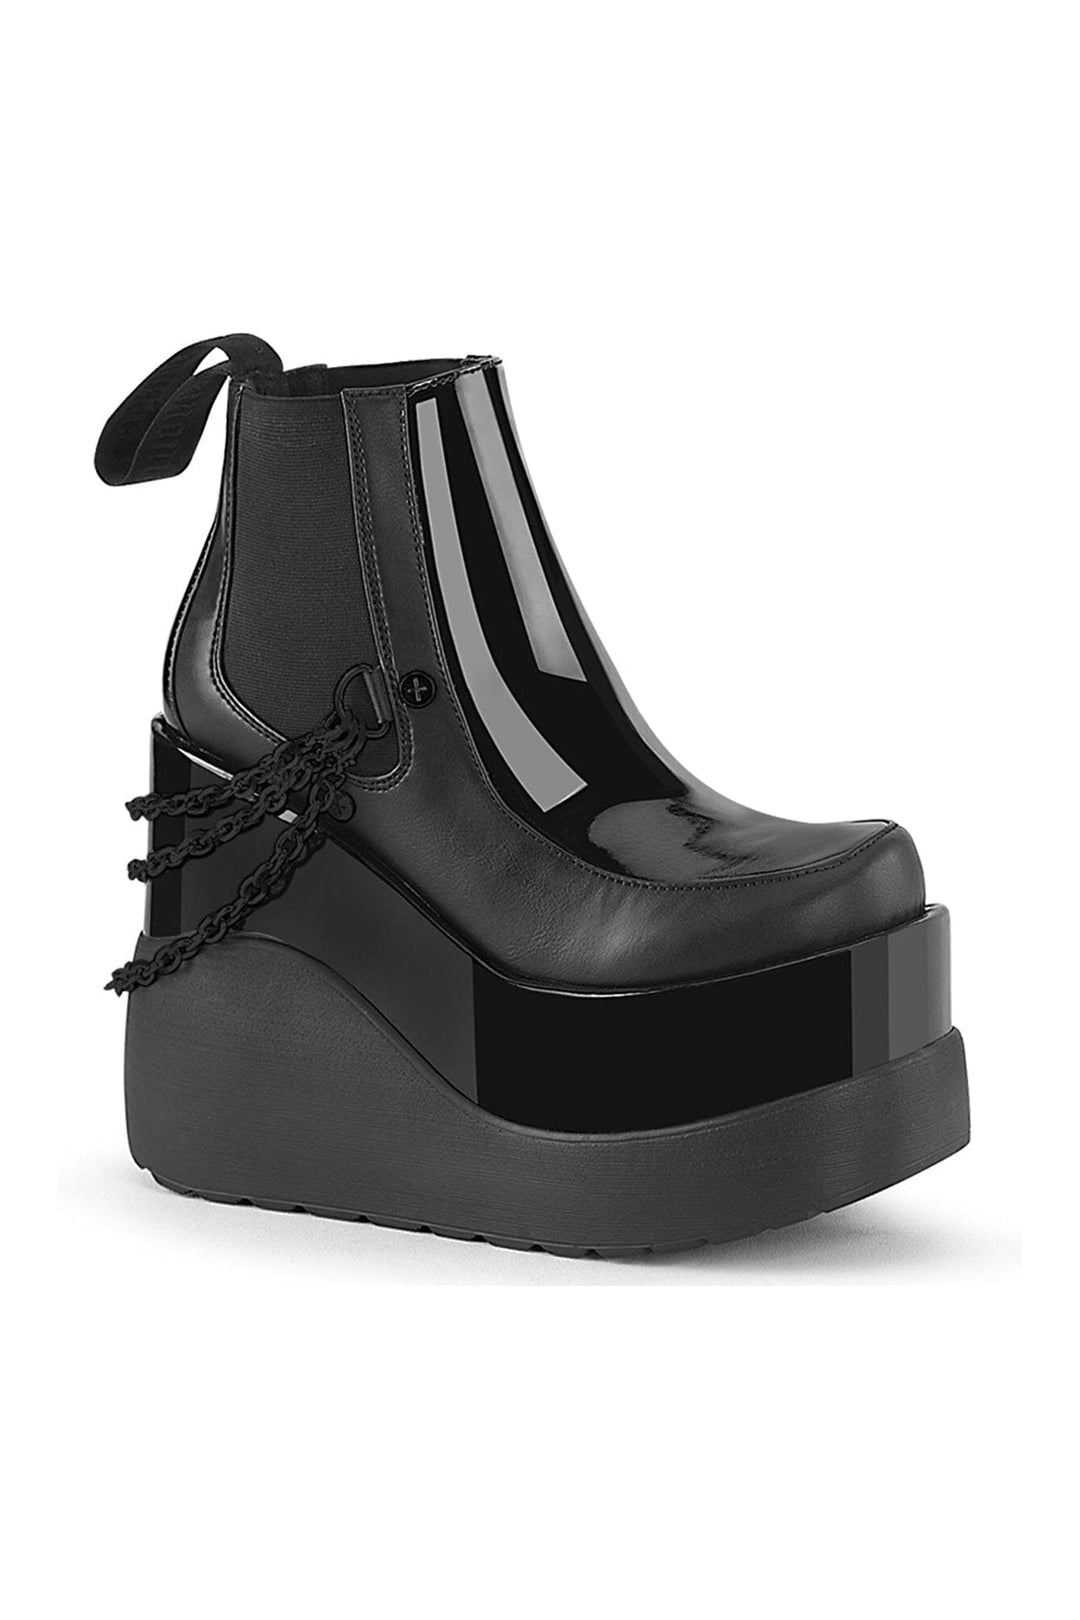 VOID-50 Black Patent Ankle Boot-Ankle Boots-Demonia-Black-10-Patent-SEXYSHOES.COM